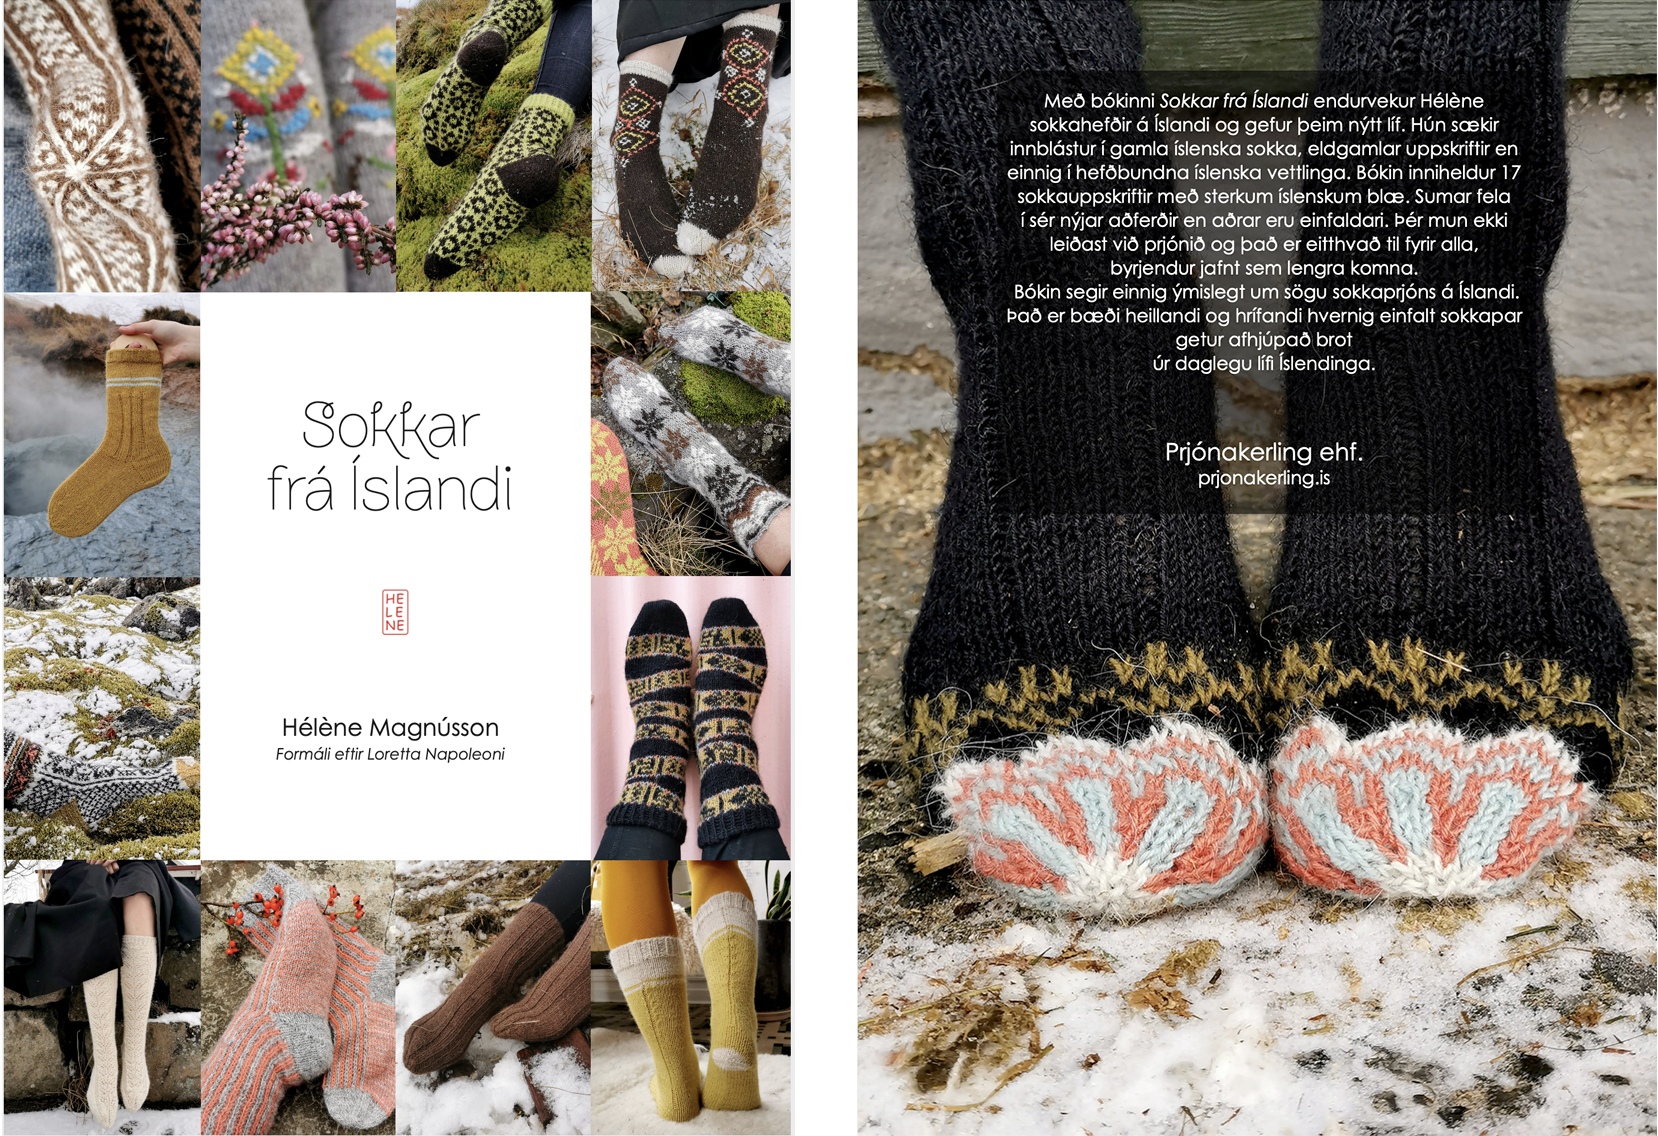 With the book Socks of Iceland, Hélène Magnússon is reinventing the tradition of socks in Iceland.  The book contains 17 socks patterns and a history of sock knitting in Iceland.